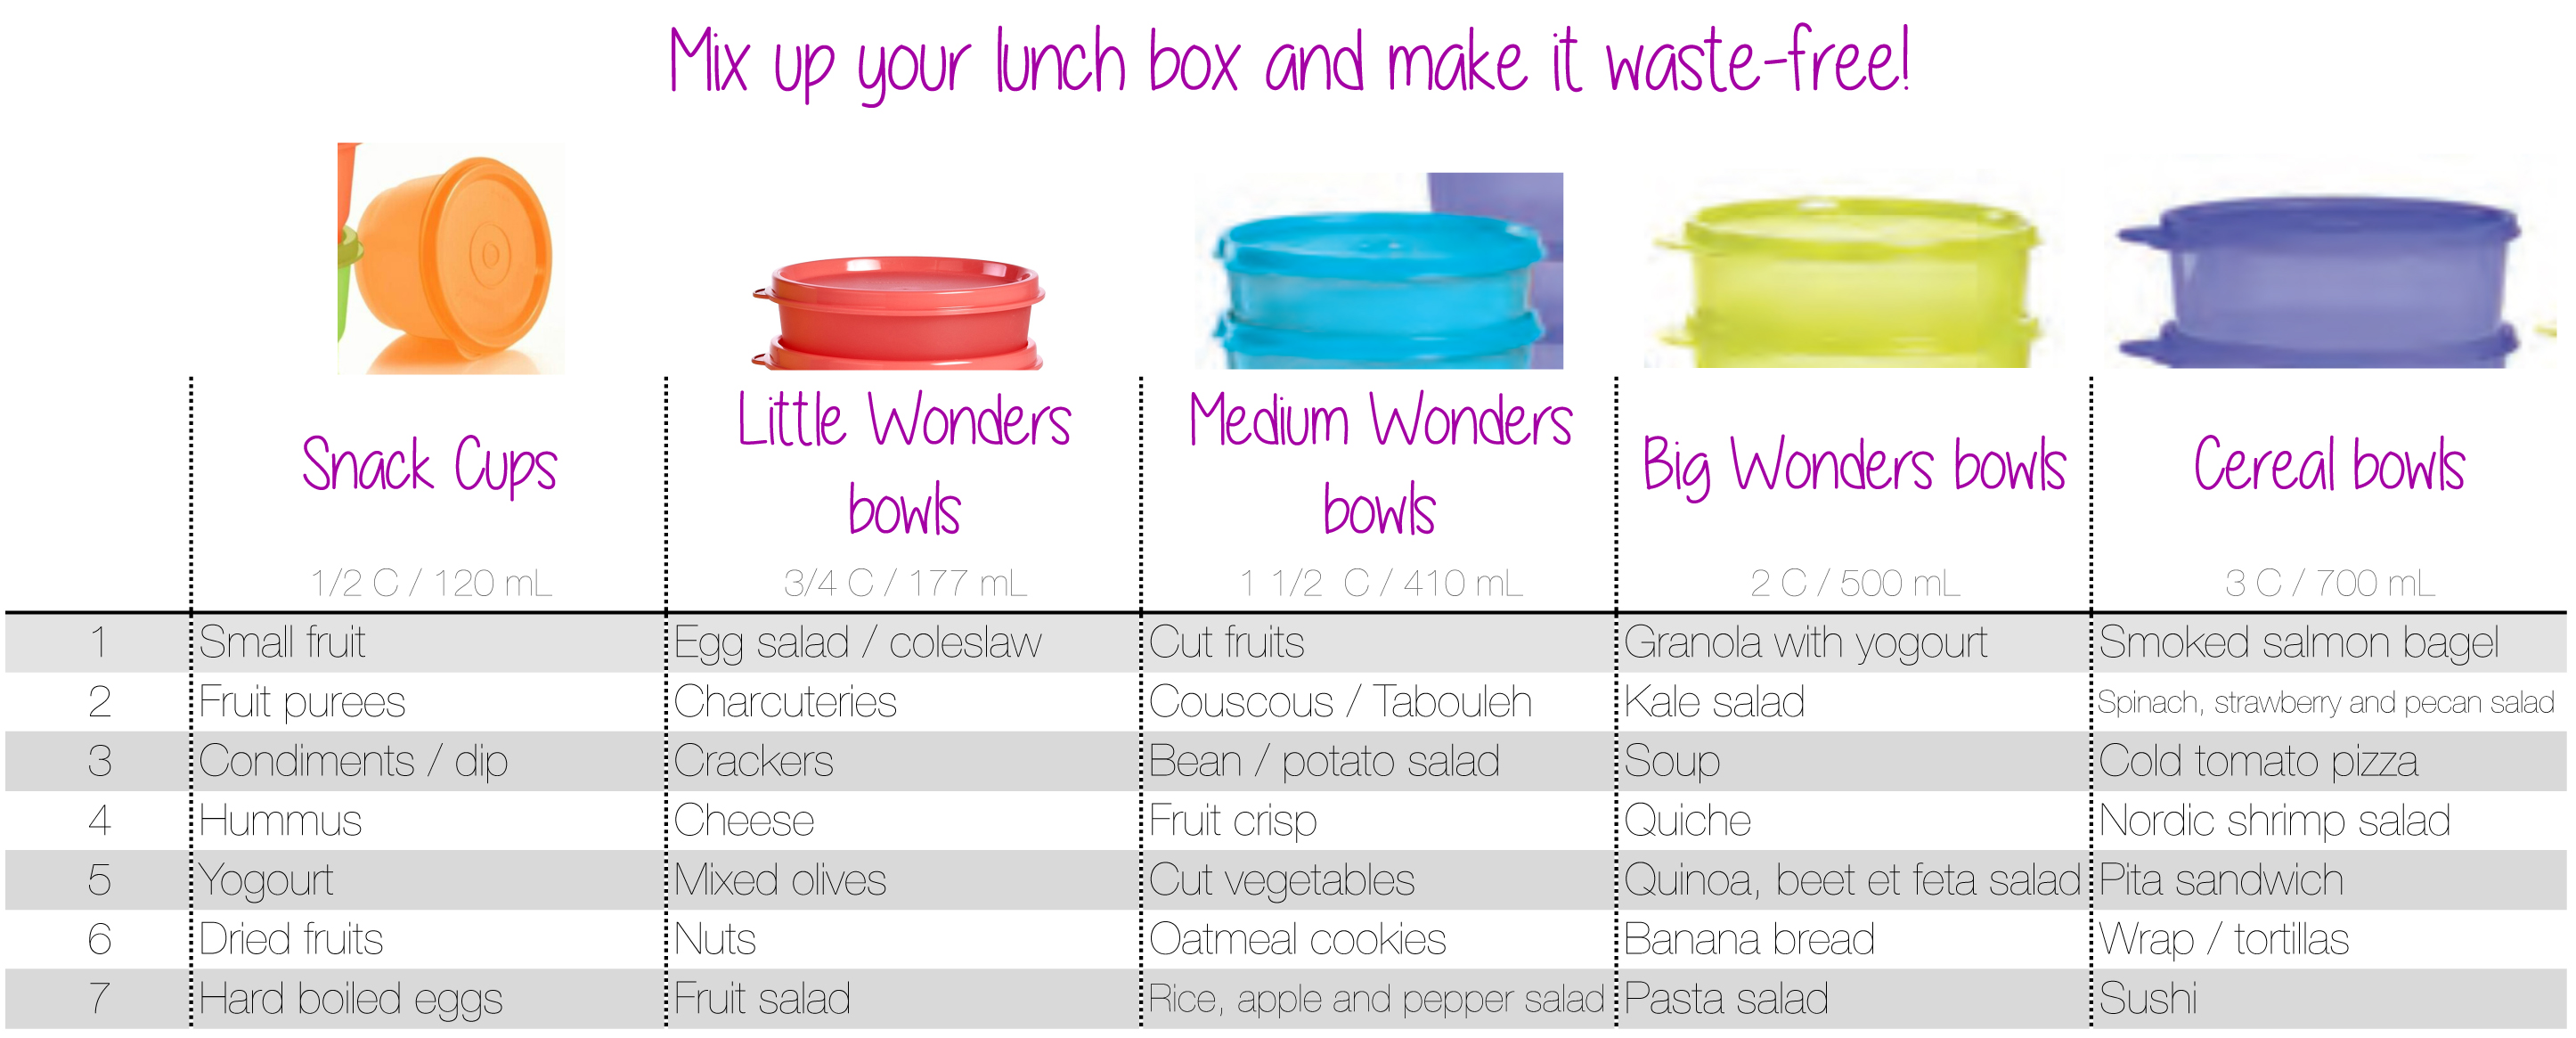 Mix up your Tupperware waste-free lunch box! - Caroline Schoofs - My  Tupperware Story